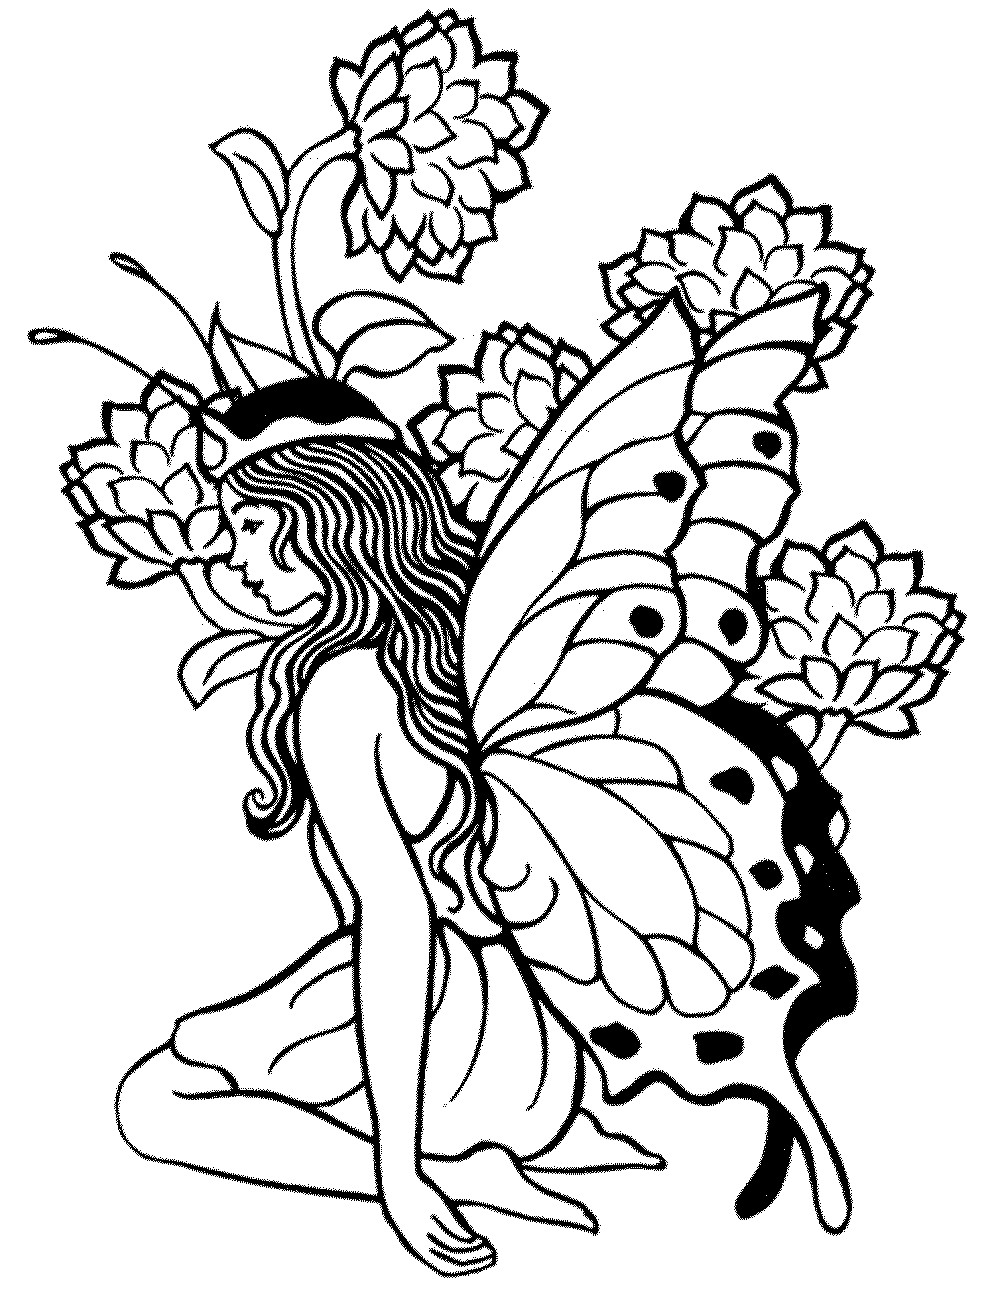 Coloring Pages For Adults To Print Out
 Free Coloring Pages For Adults Printable Detailed Image 23